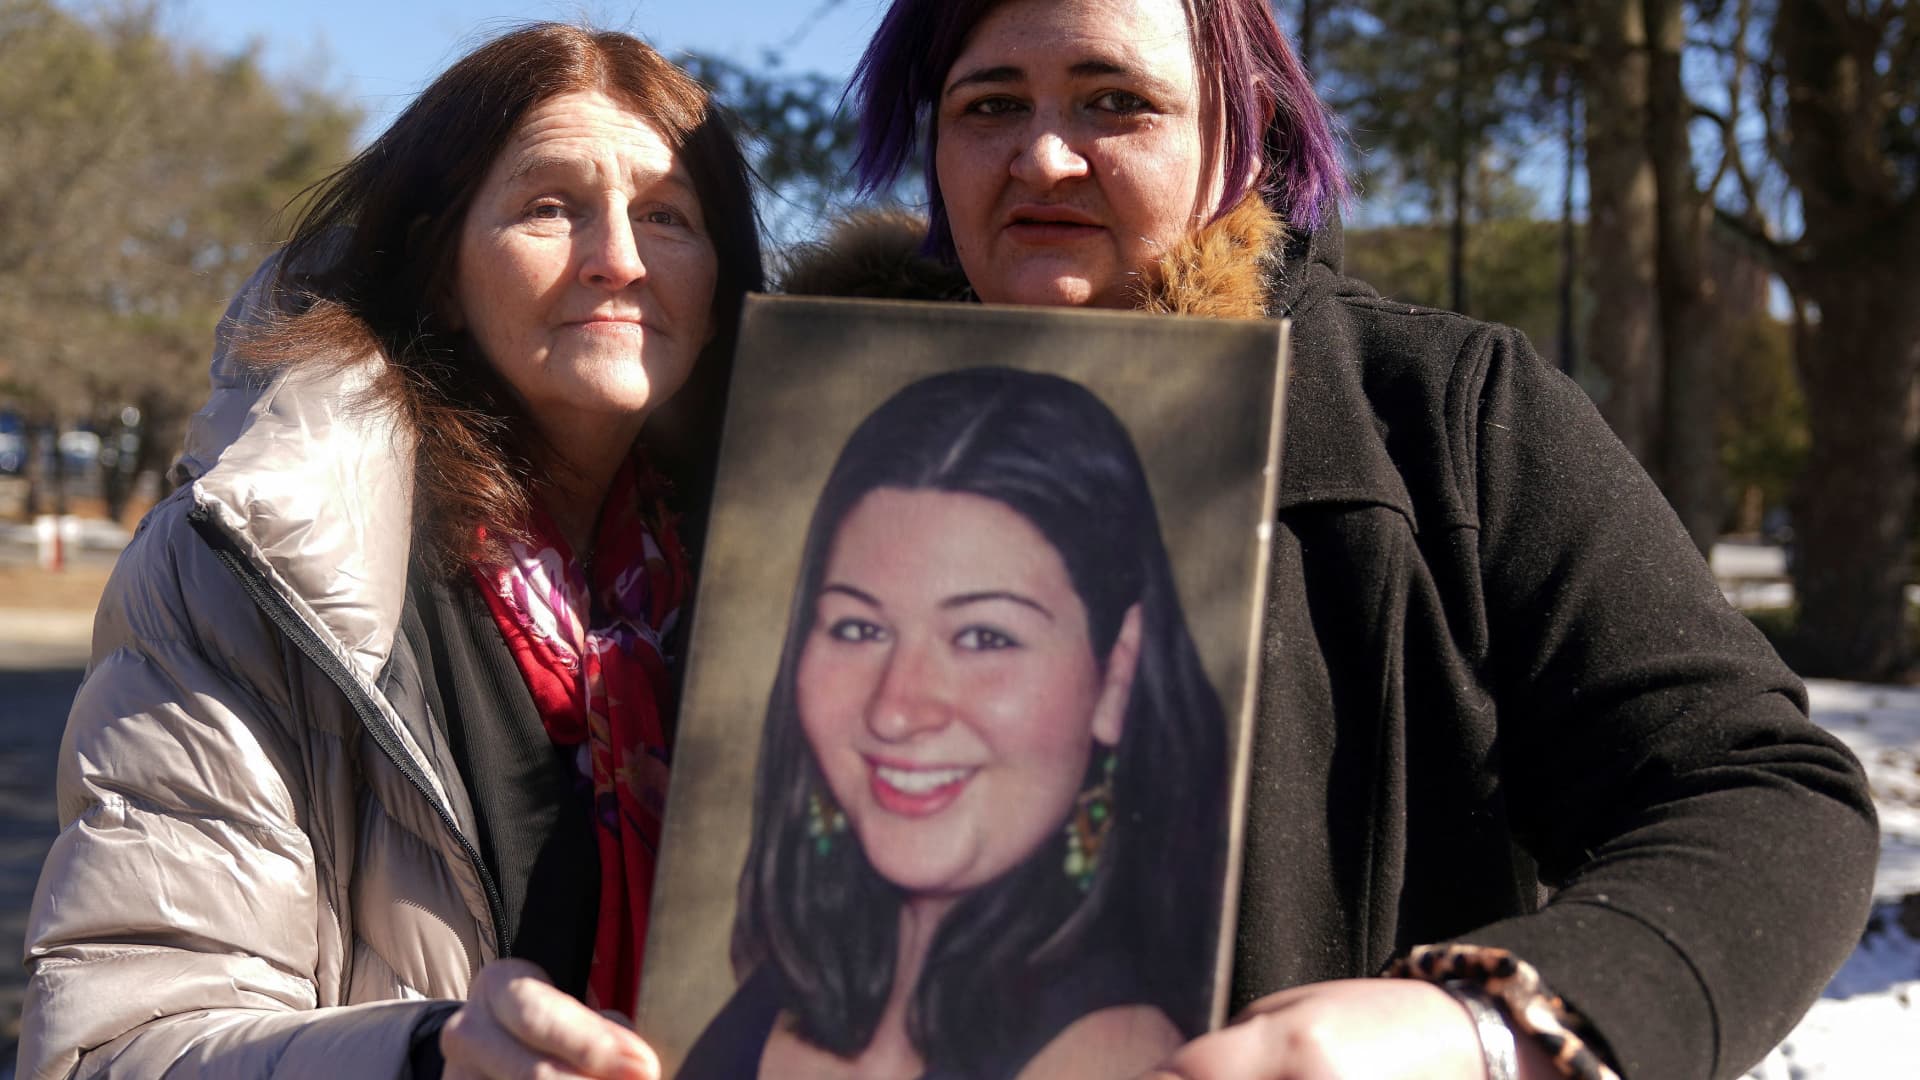 Mary D'Avino and Hannah Miranda, the mother and sister of Rachel D'Avino, a Sandy Hook Elementary School shooting victim, hold a photo of her as they pose for a portrait following a press conference to announce a settlement with Remington Arms in Trumbull, Connecticut, U.S., February 15, 2022.